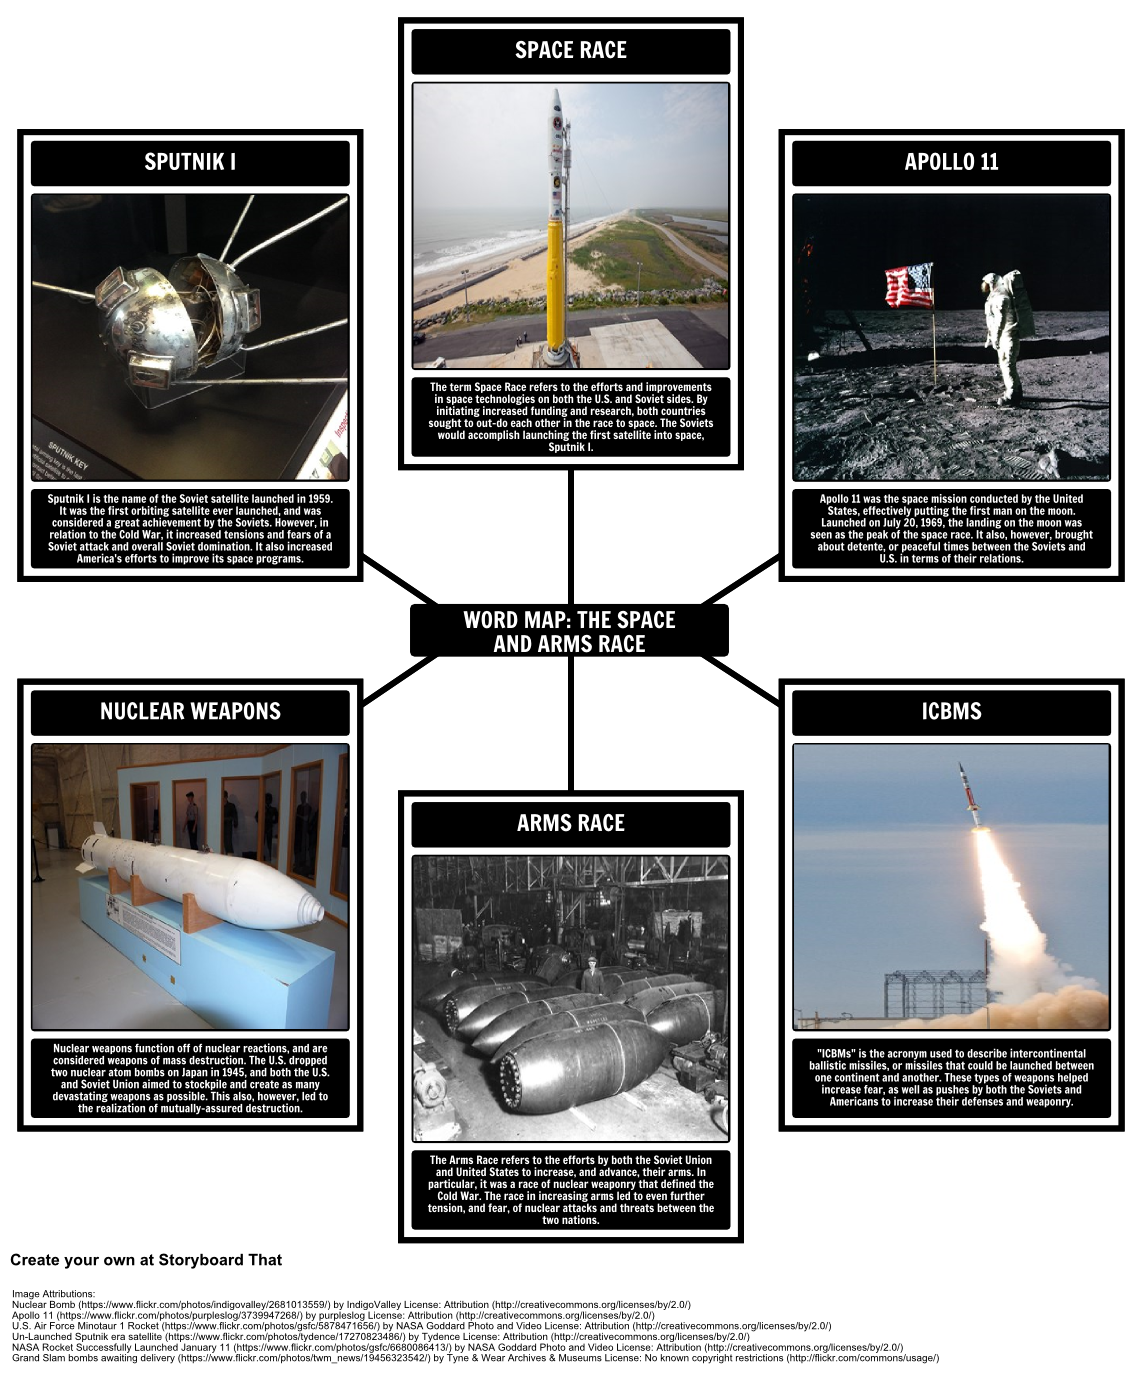 Cold War Terms - The Space Race and the Arms Race